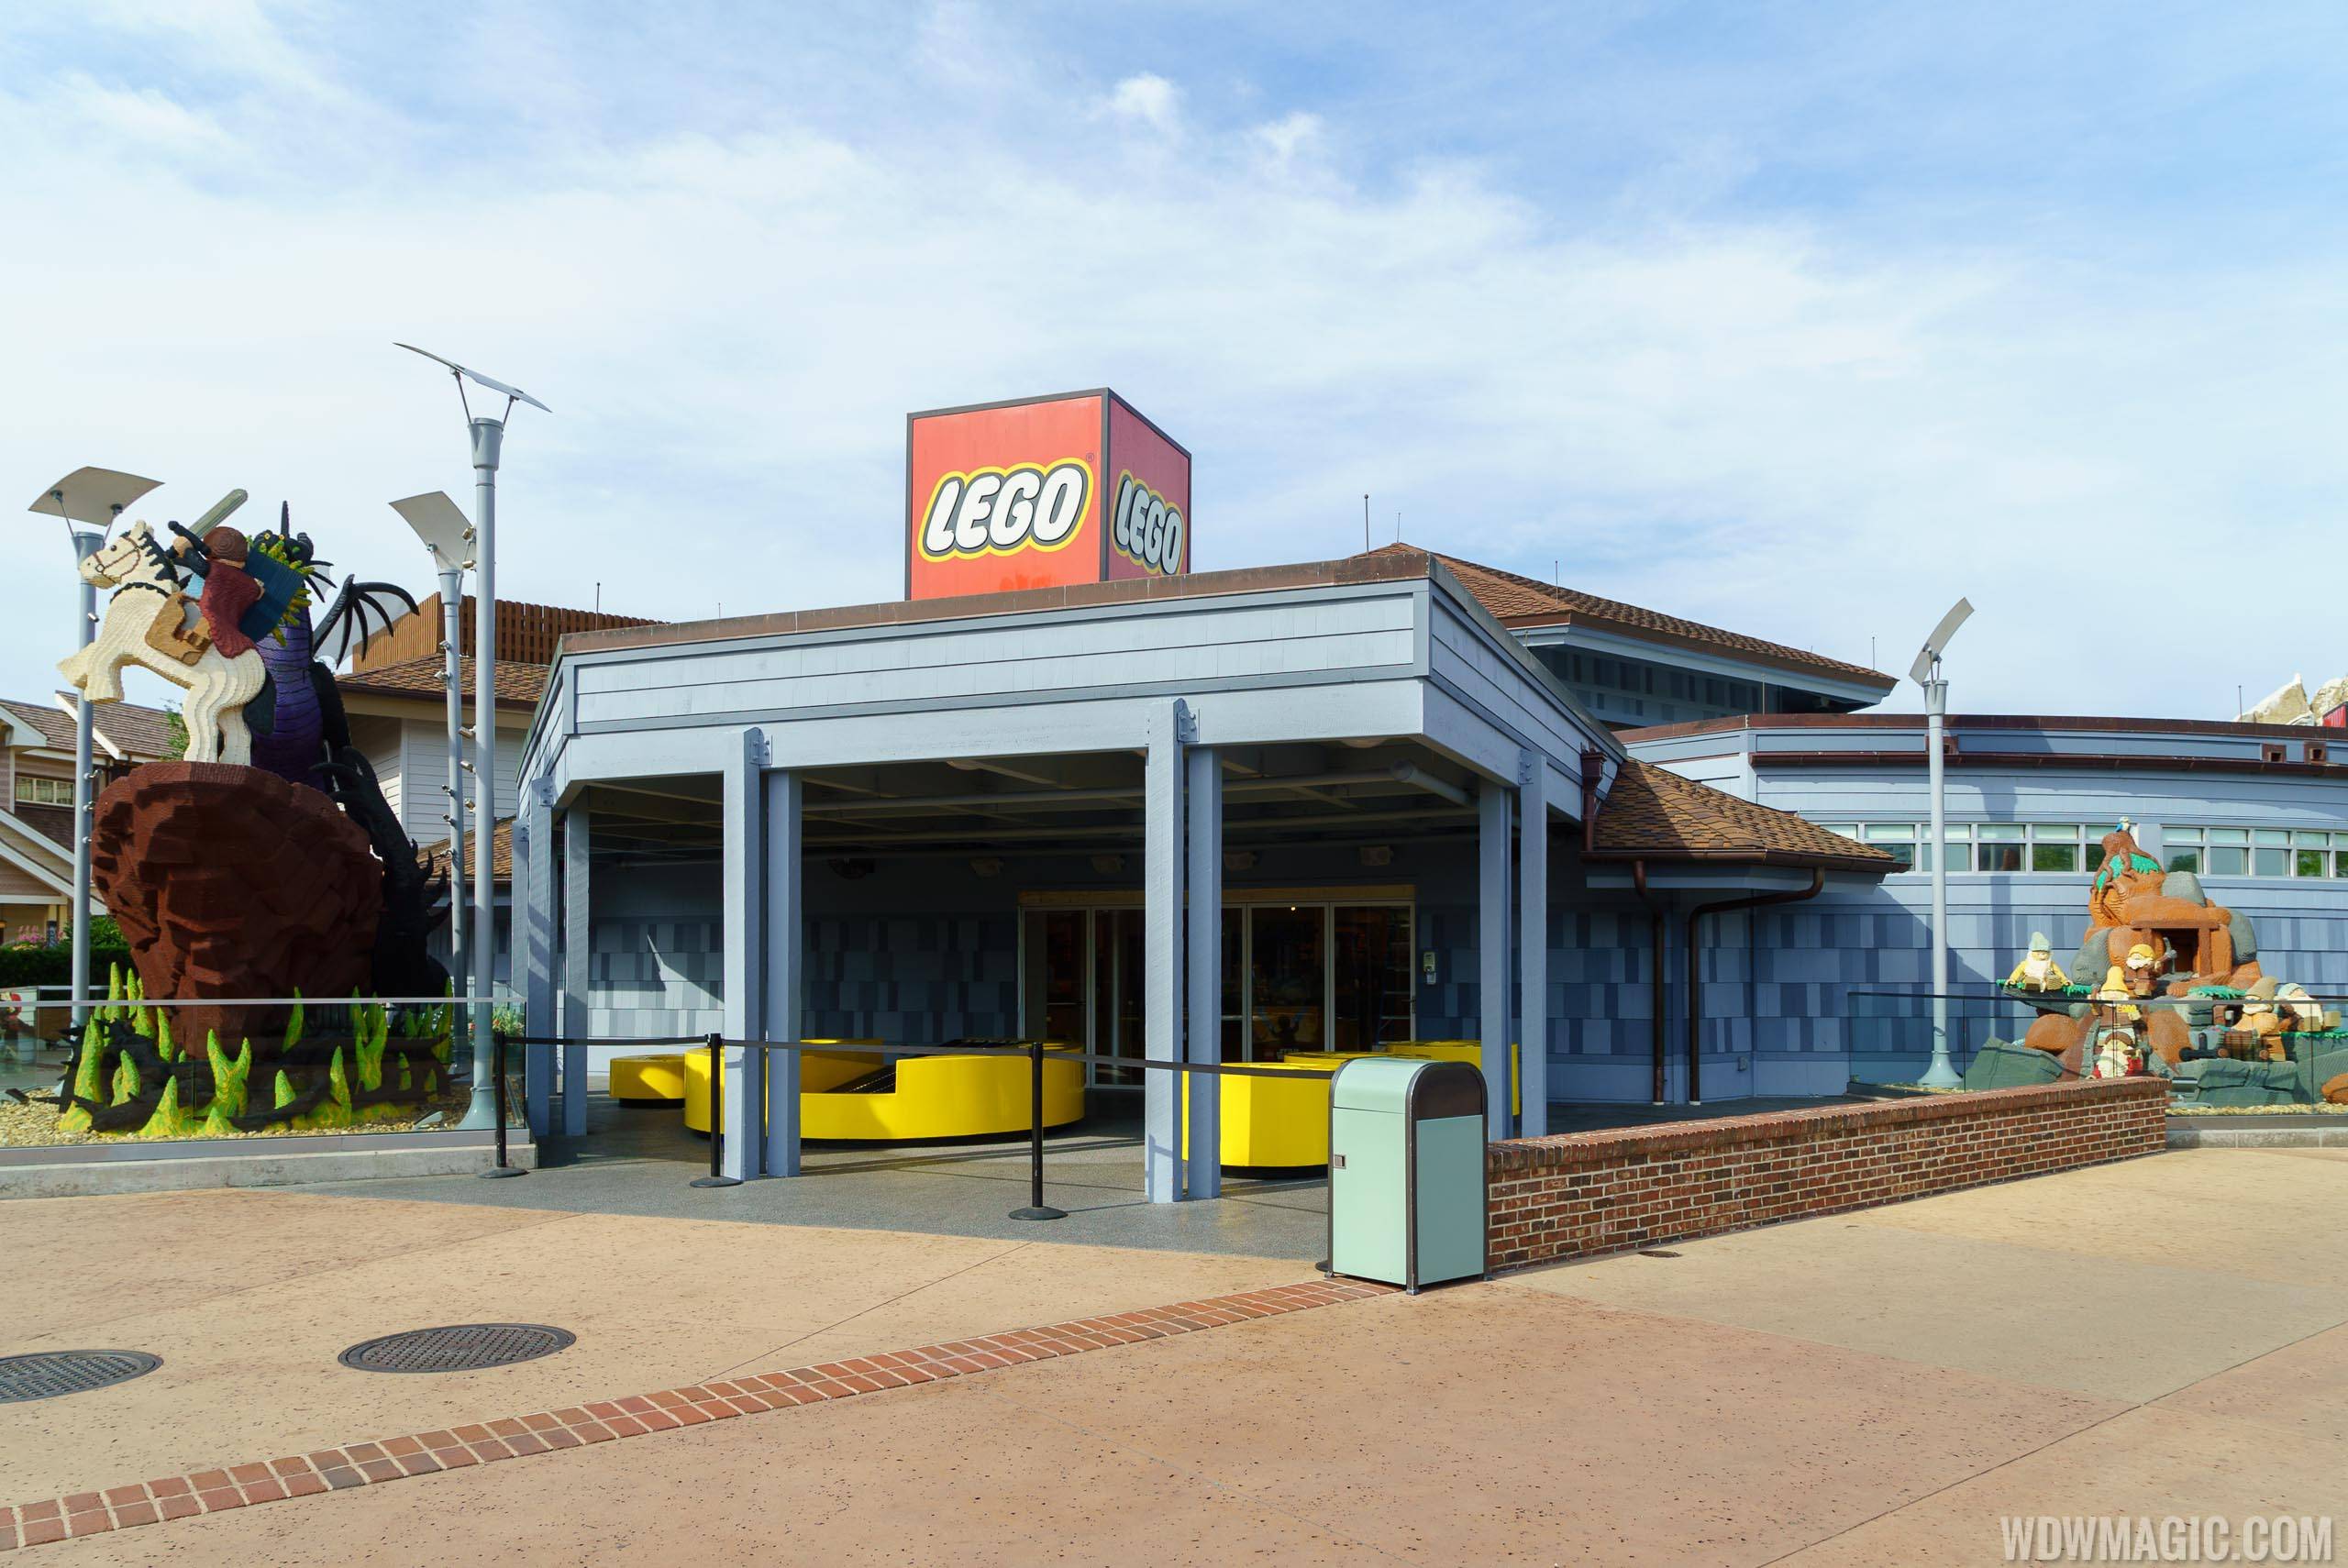 New exterior paint scheme at The LEGO Store